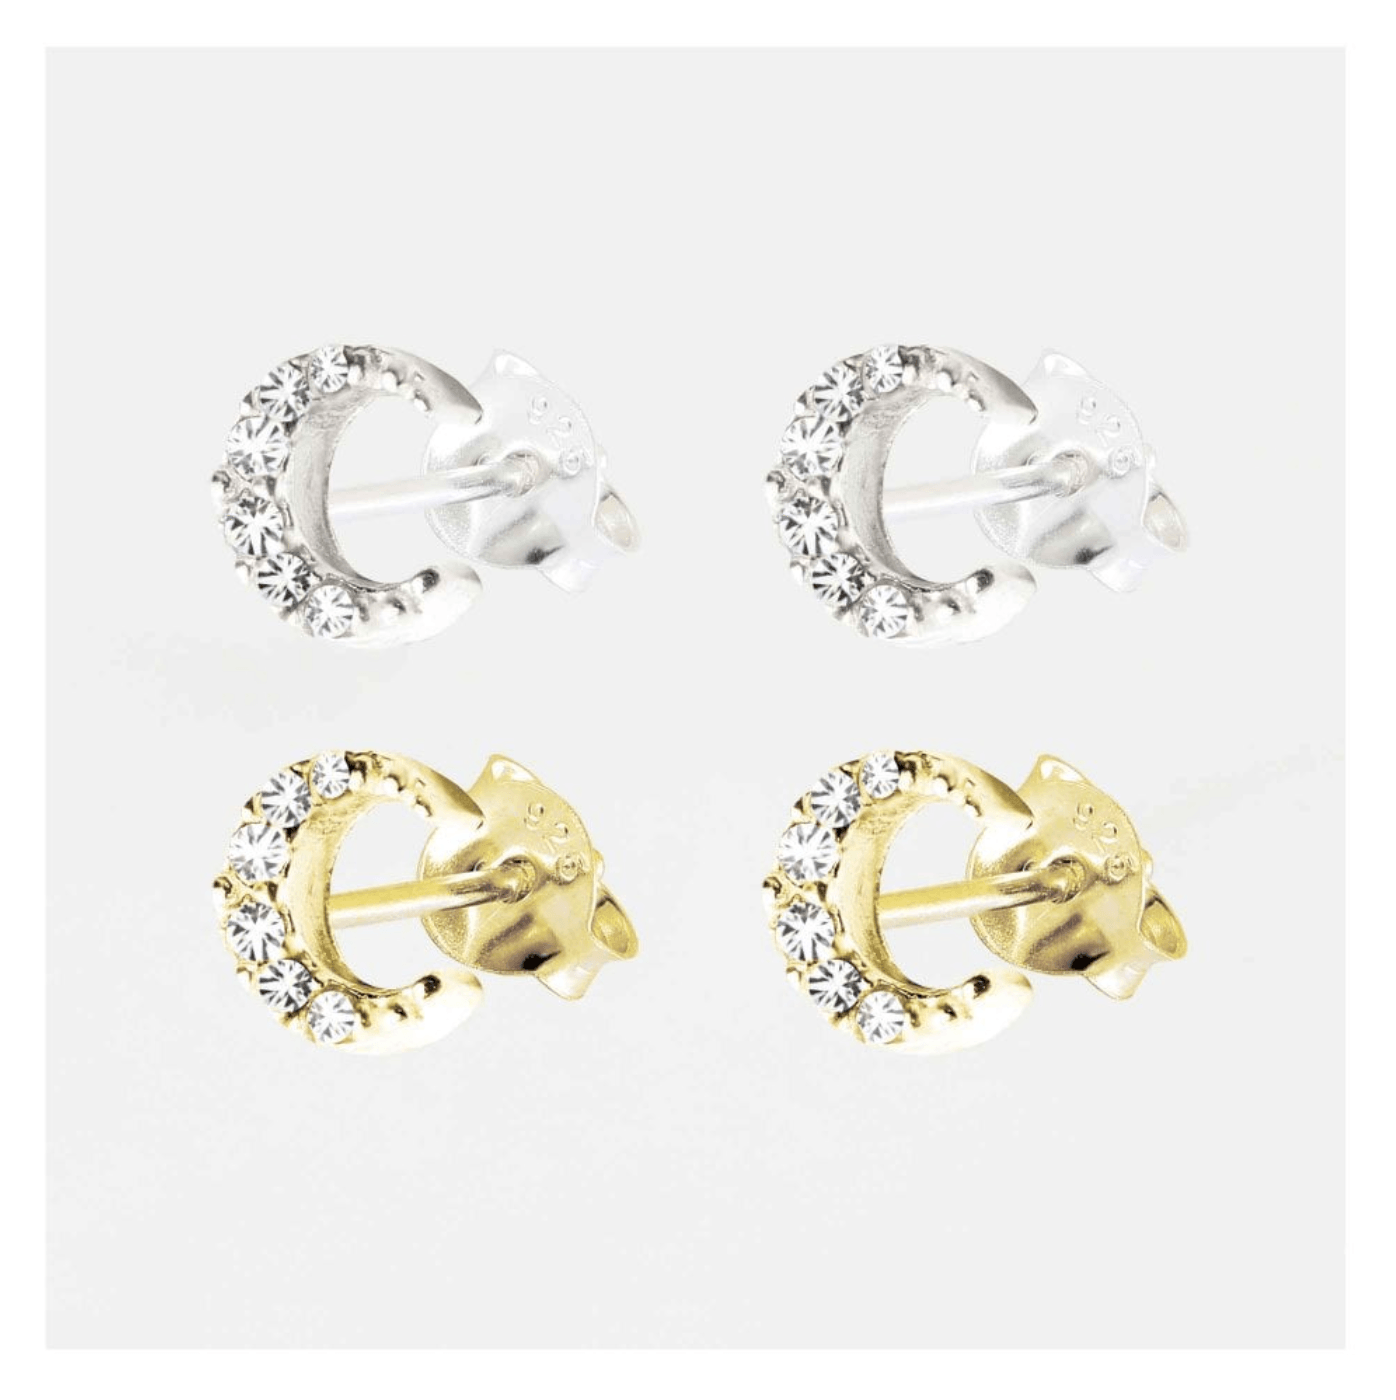 Kingsley Ryan Sparkling Silver or Gold Crescent Moon Ear Studs - Rococo Jewellery